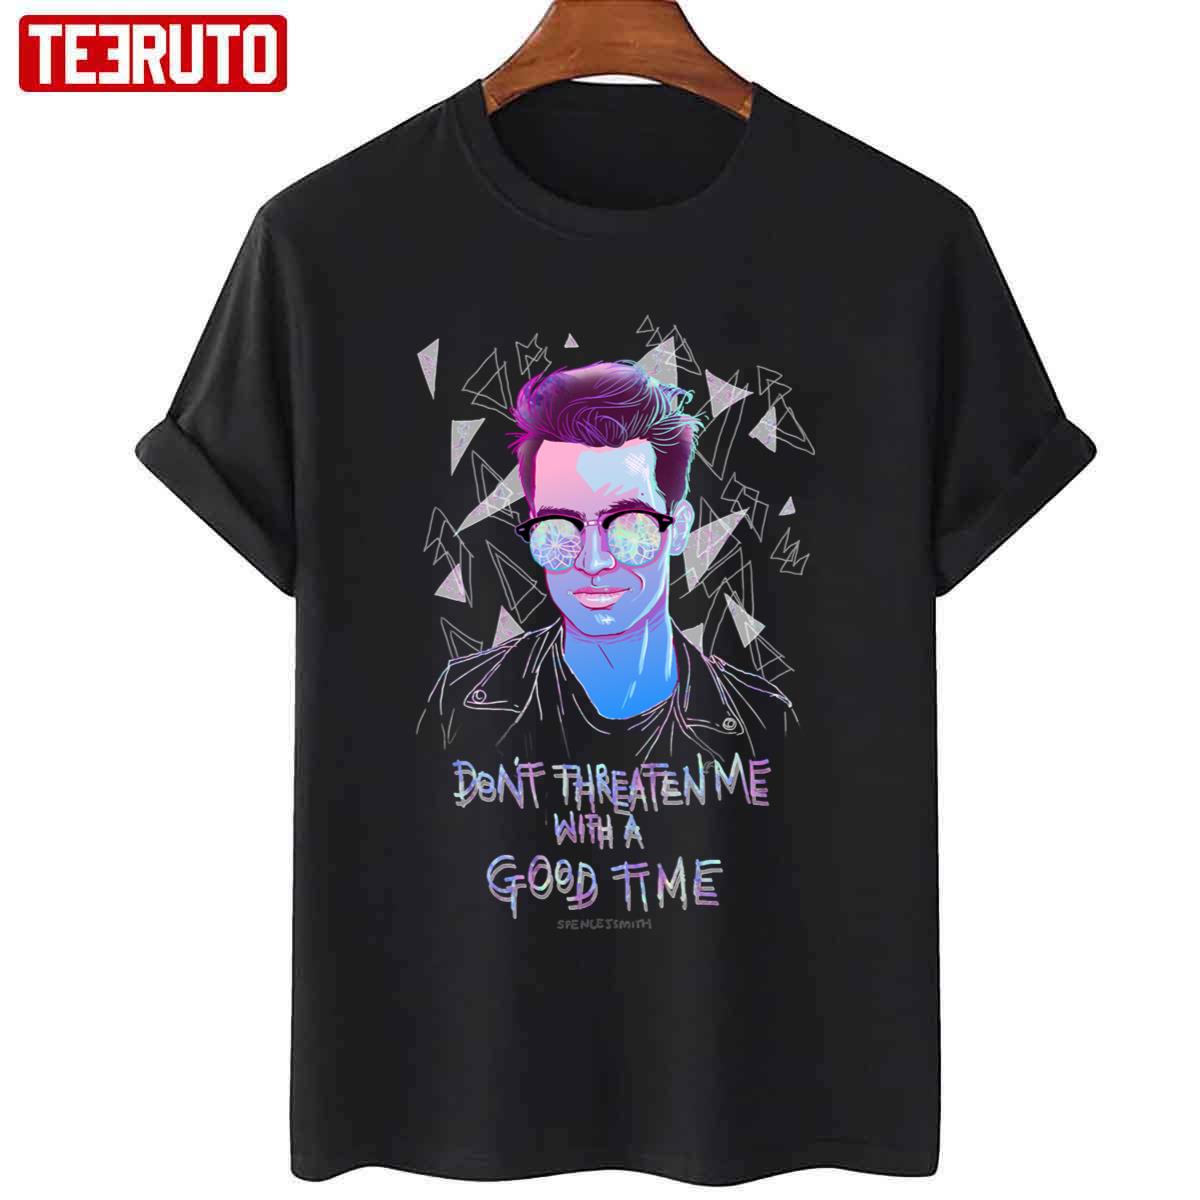 Don't Threaten Me With A Good Time Panic! At The Disco Unisex T-shirt